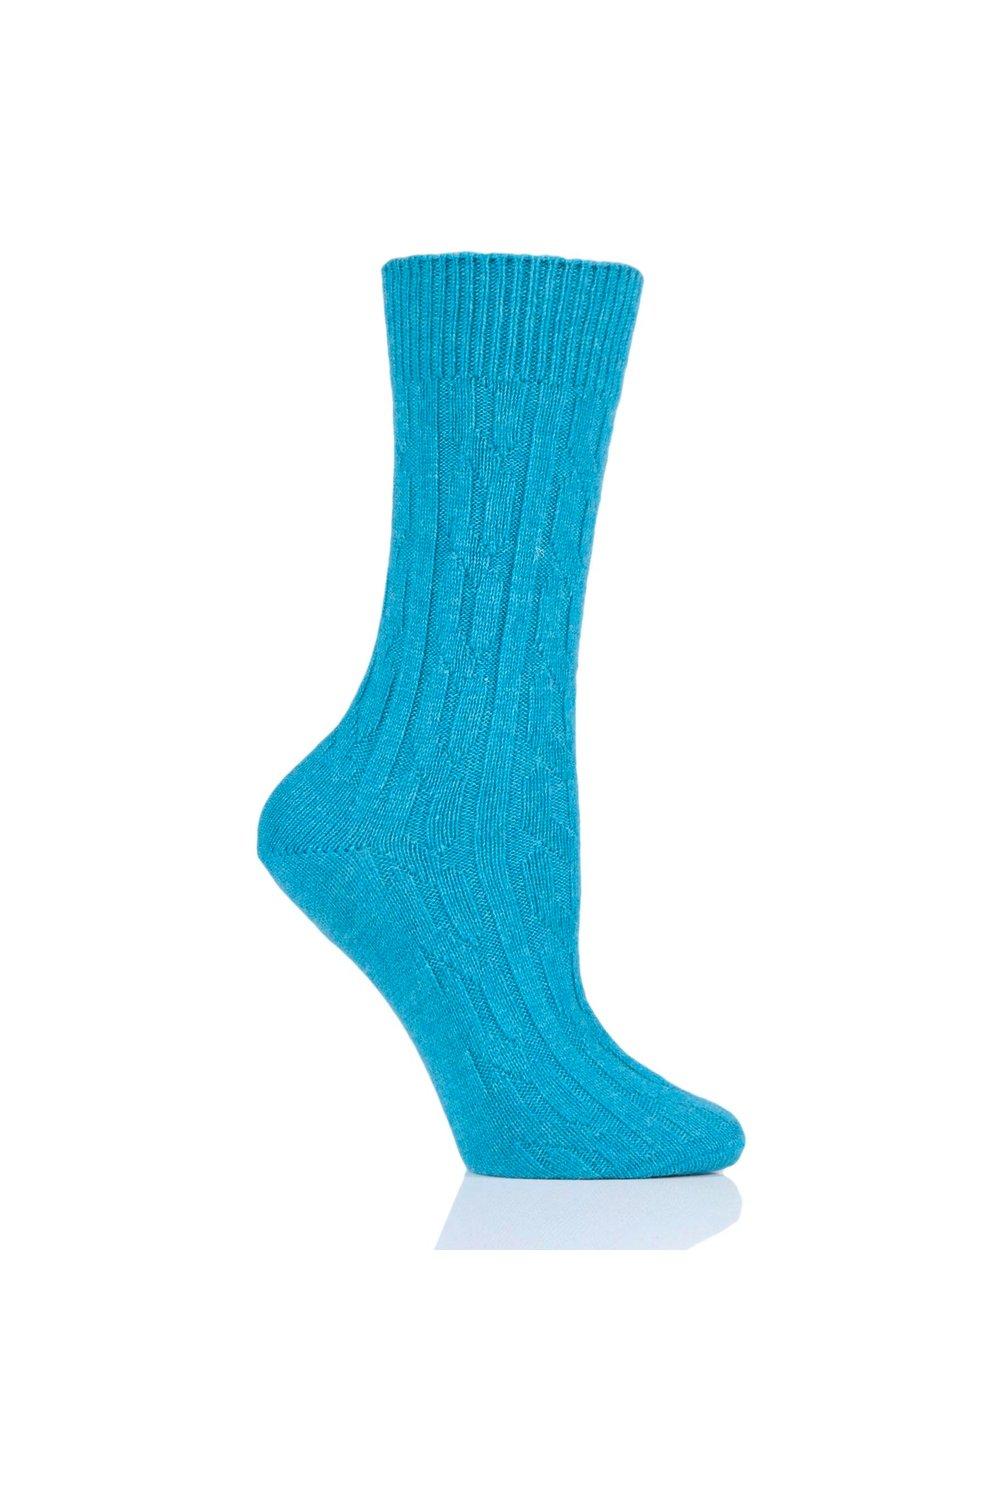 1 Pair 100% Cashmere Cable Knit Bed Socks